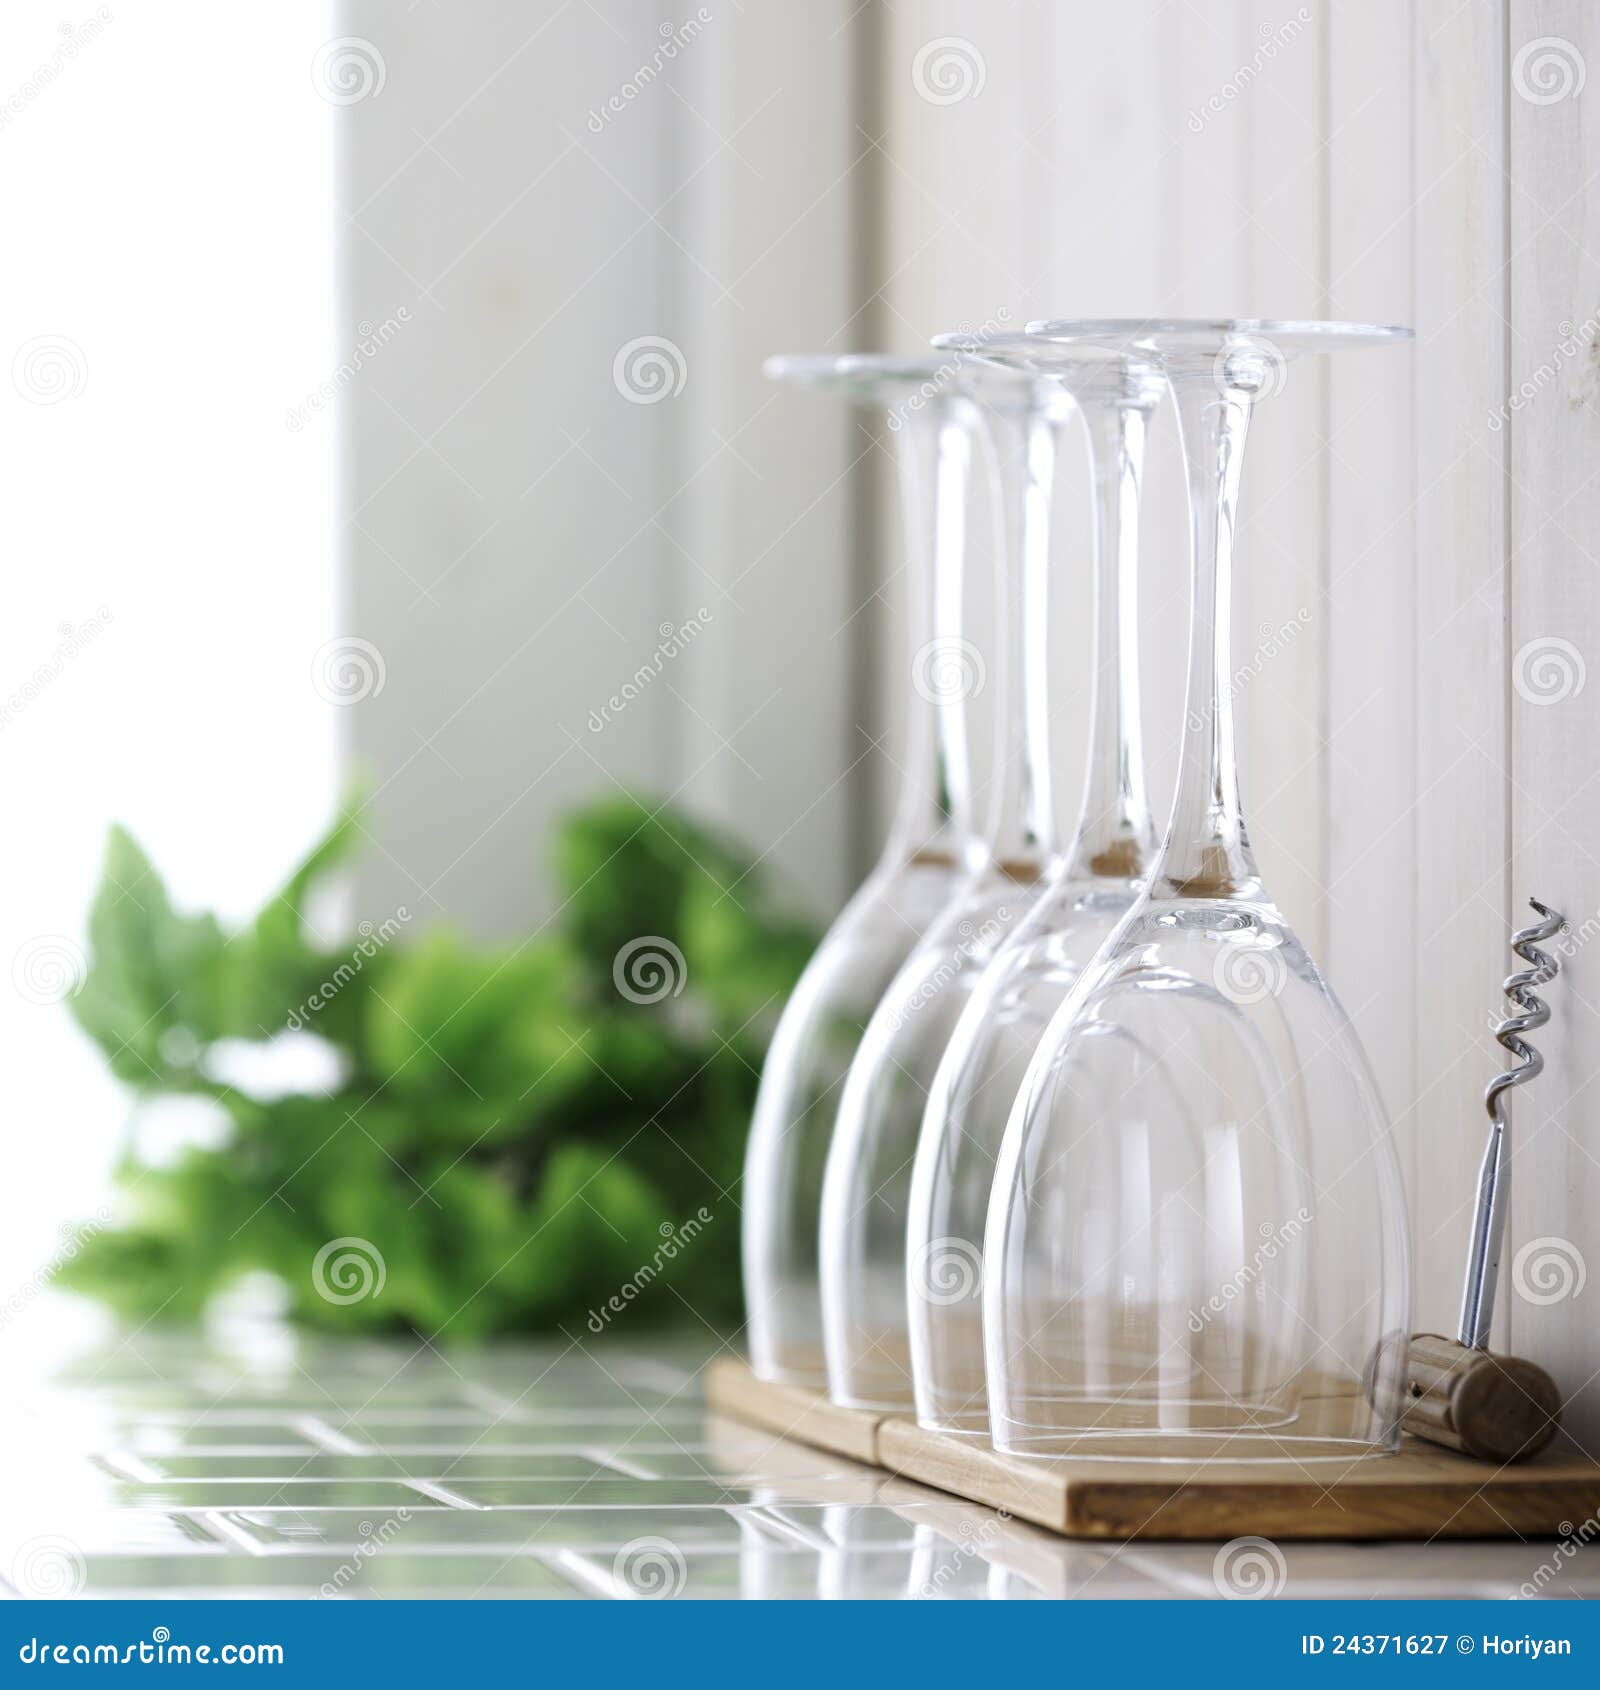 Wine Glass on Kitchen Counter Stock Image - Image of event, design